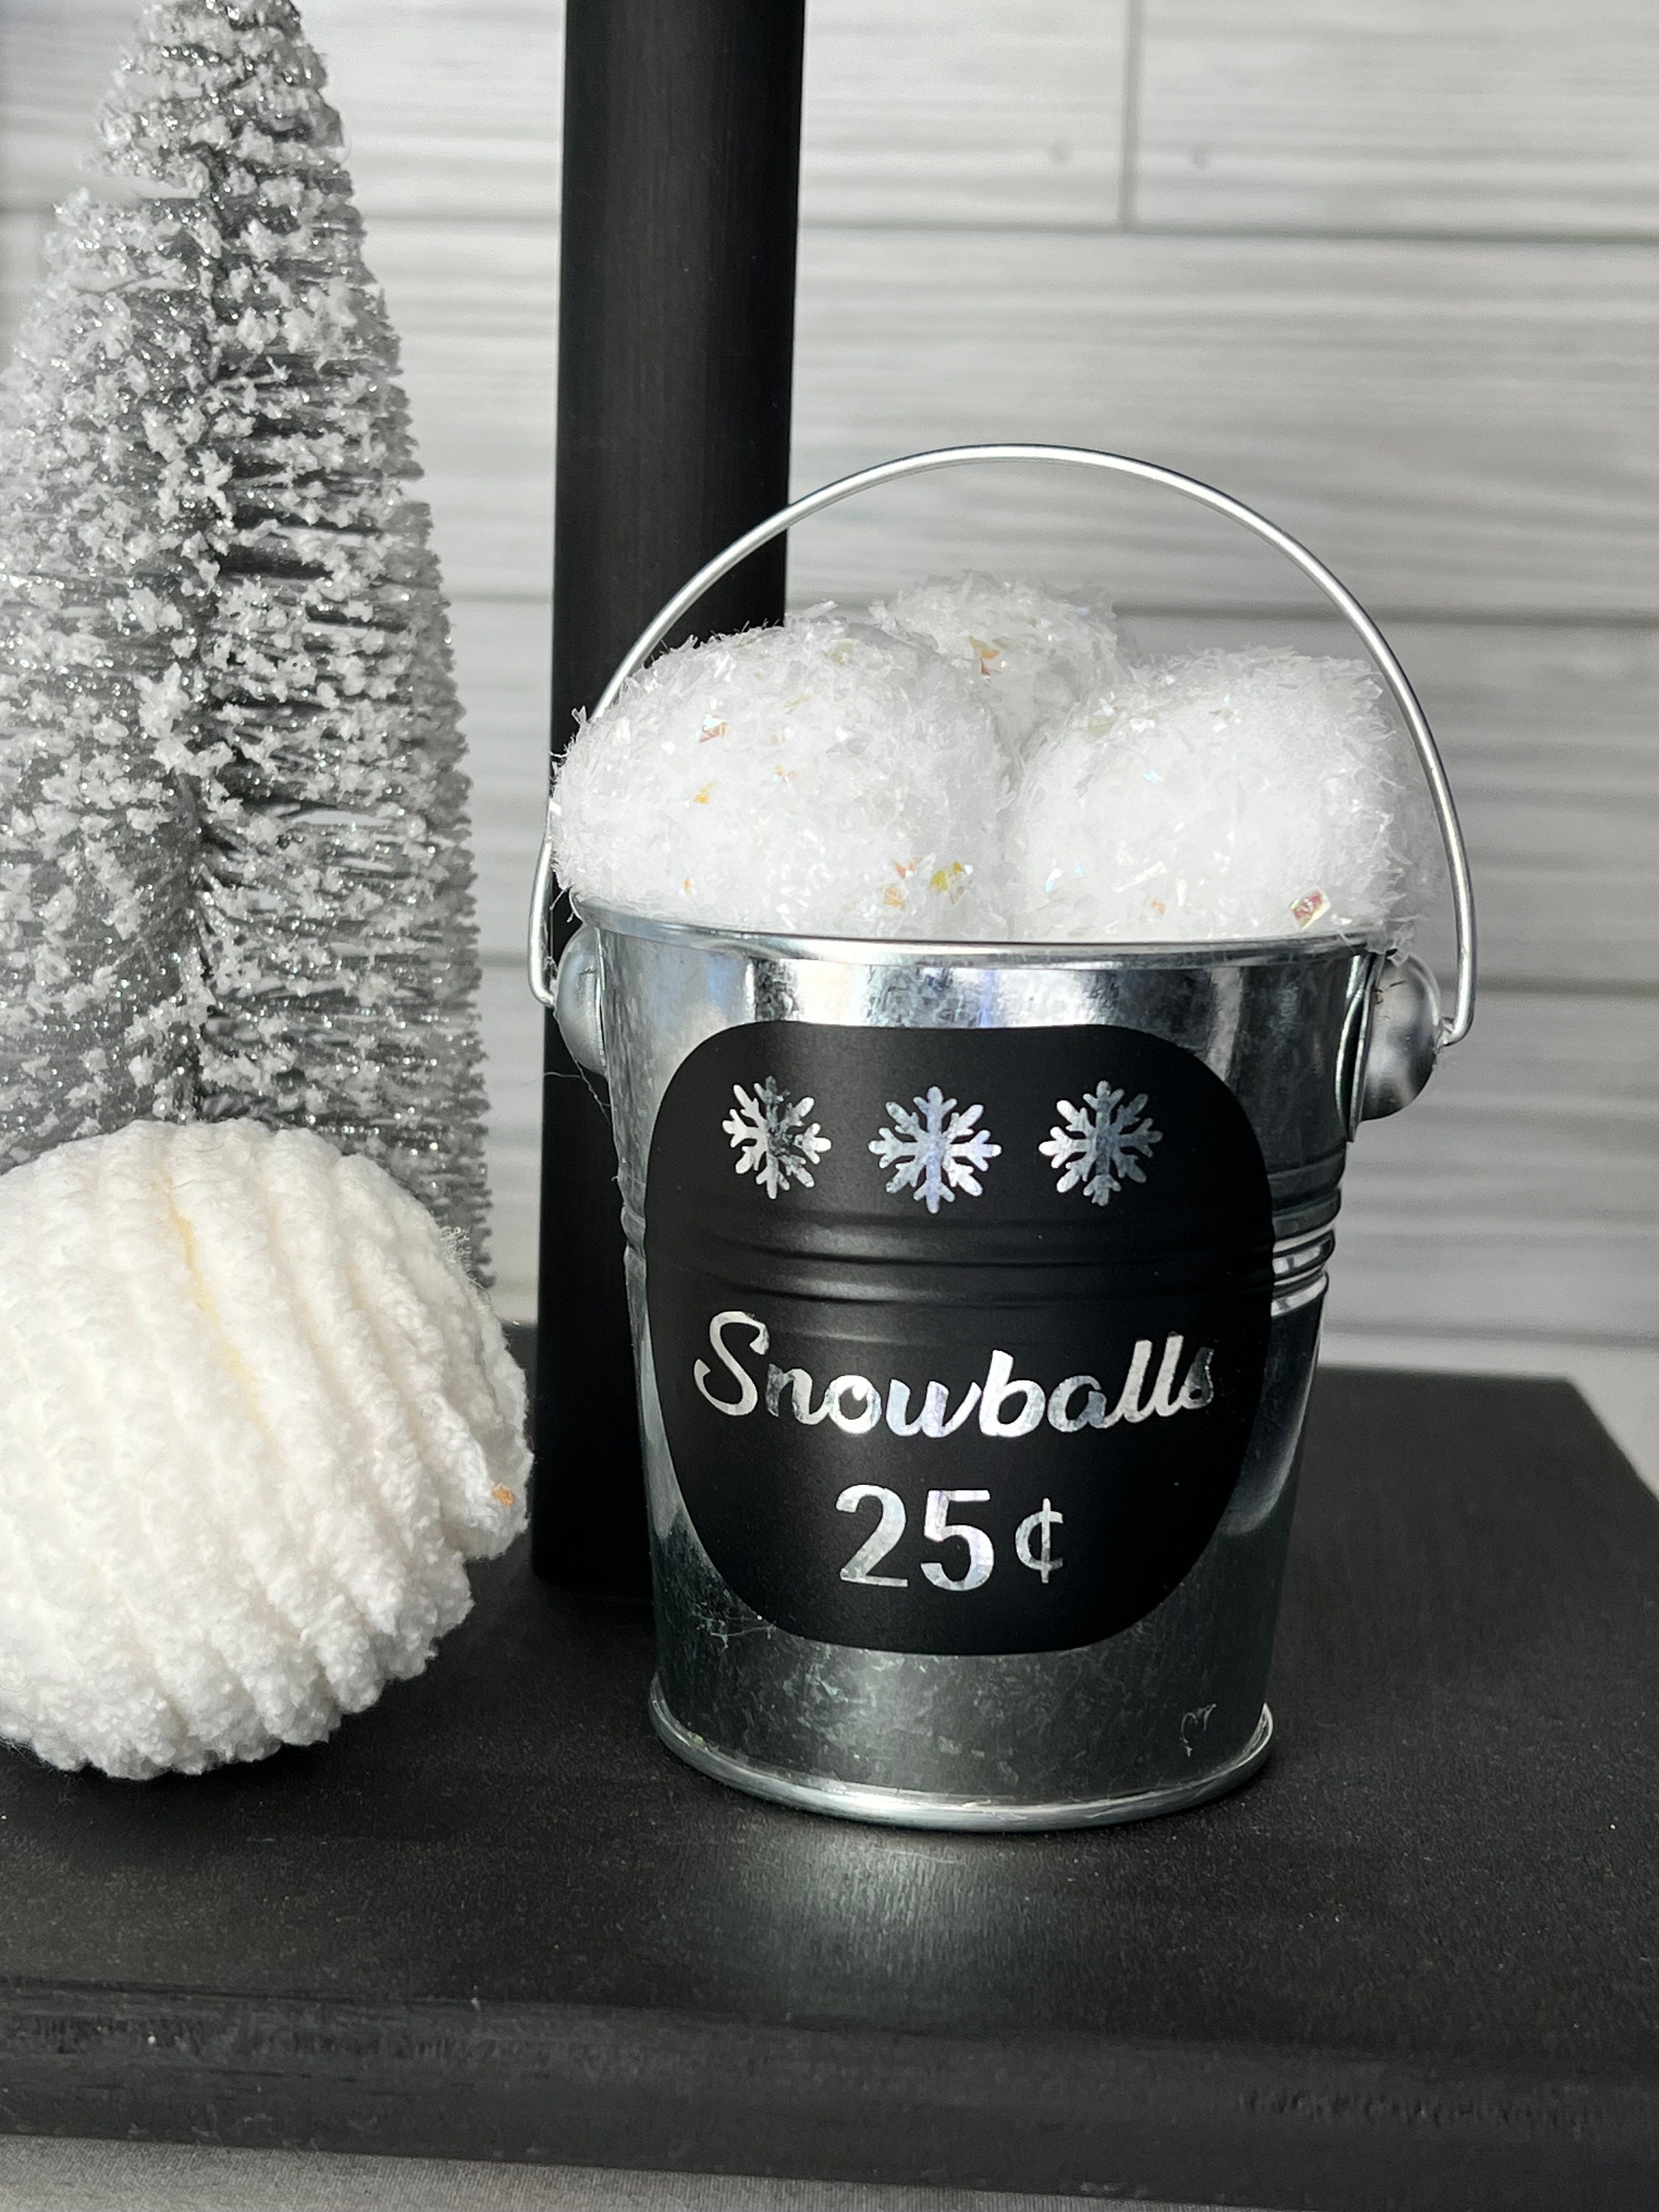 Zpaqi Set of 20/30/50 Snowball Fight Fake Snowballs Winter Xmas Decoration Indoor Gift for Kids Christmas Fun Kids Educational, Boy's, Size: 20